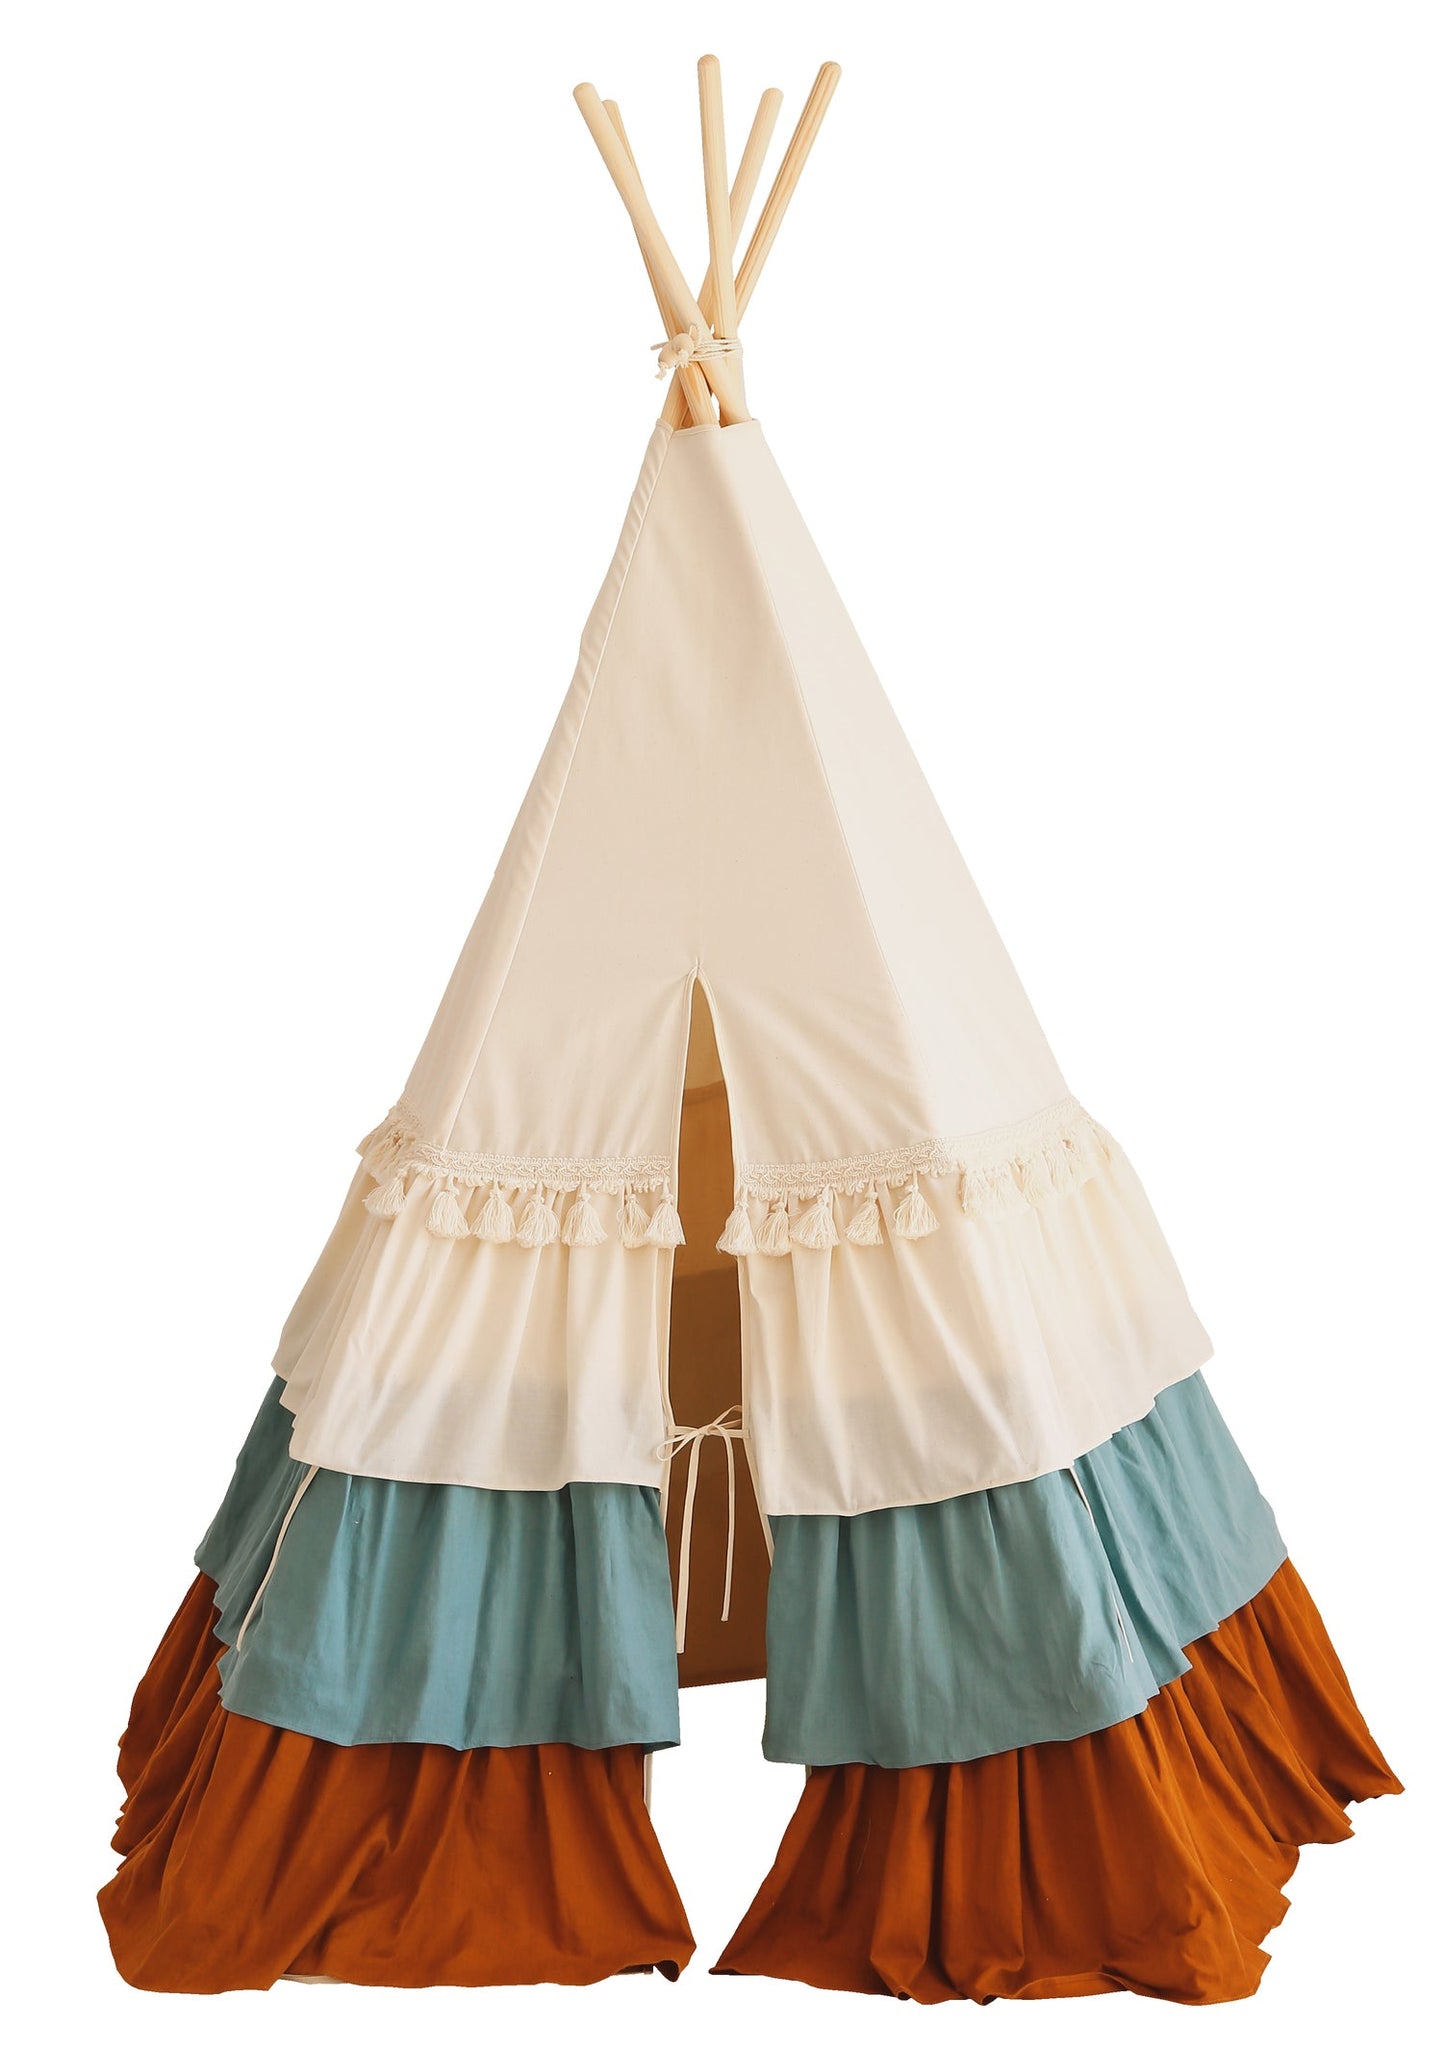 “Circus” Teepee Tent with Frills